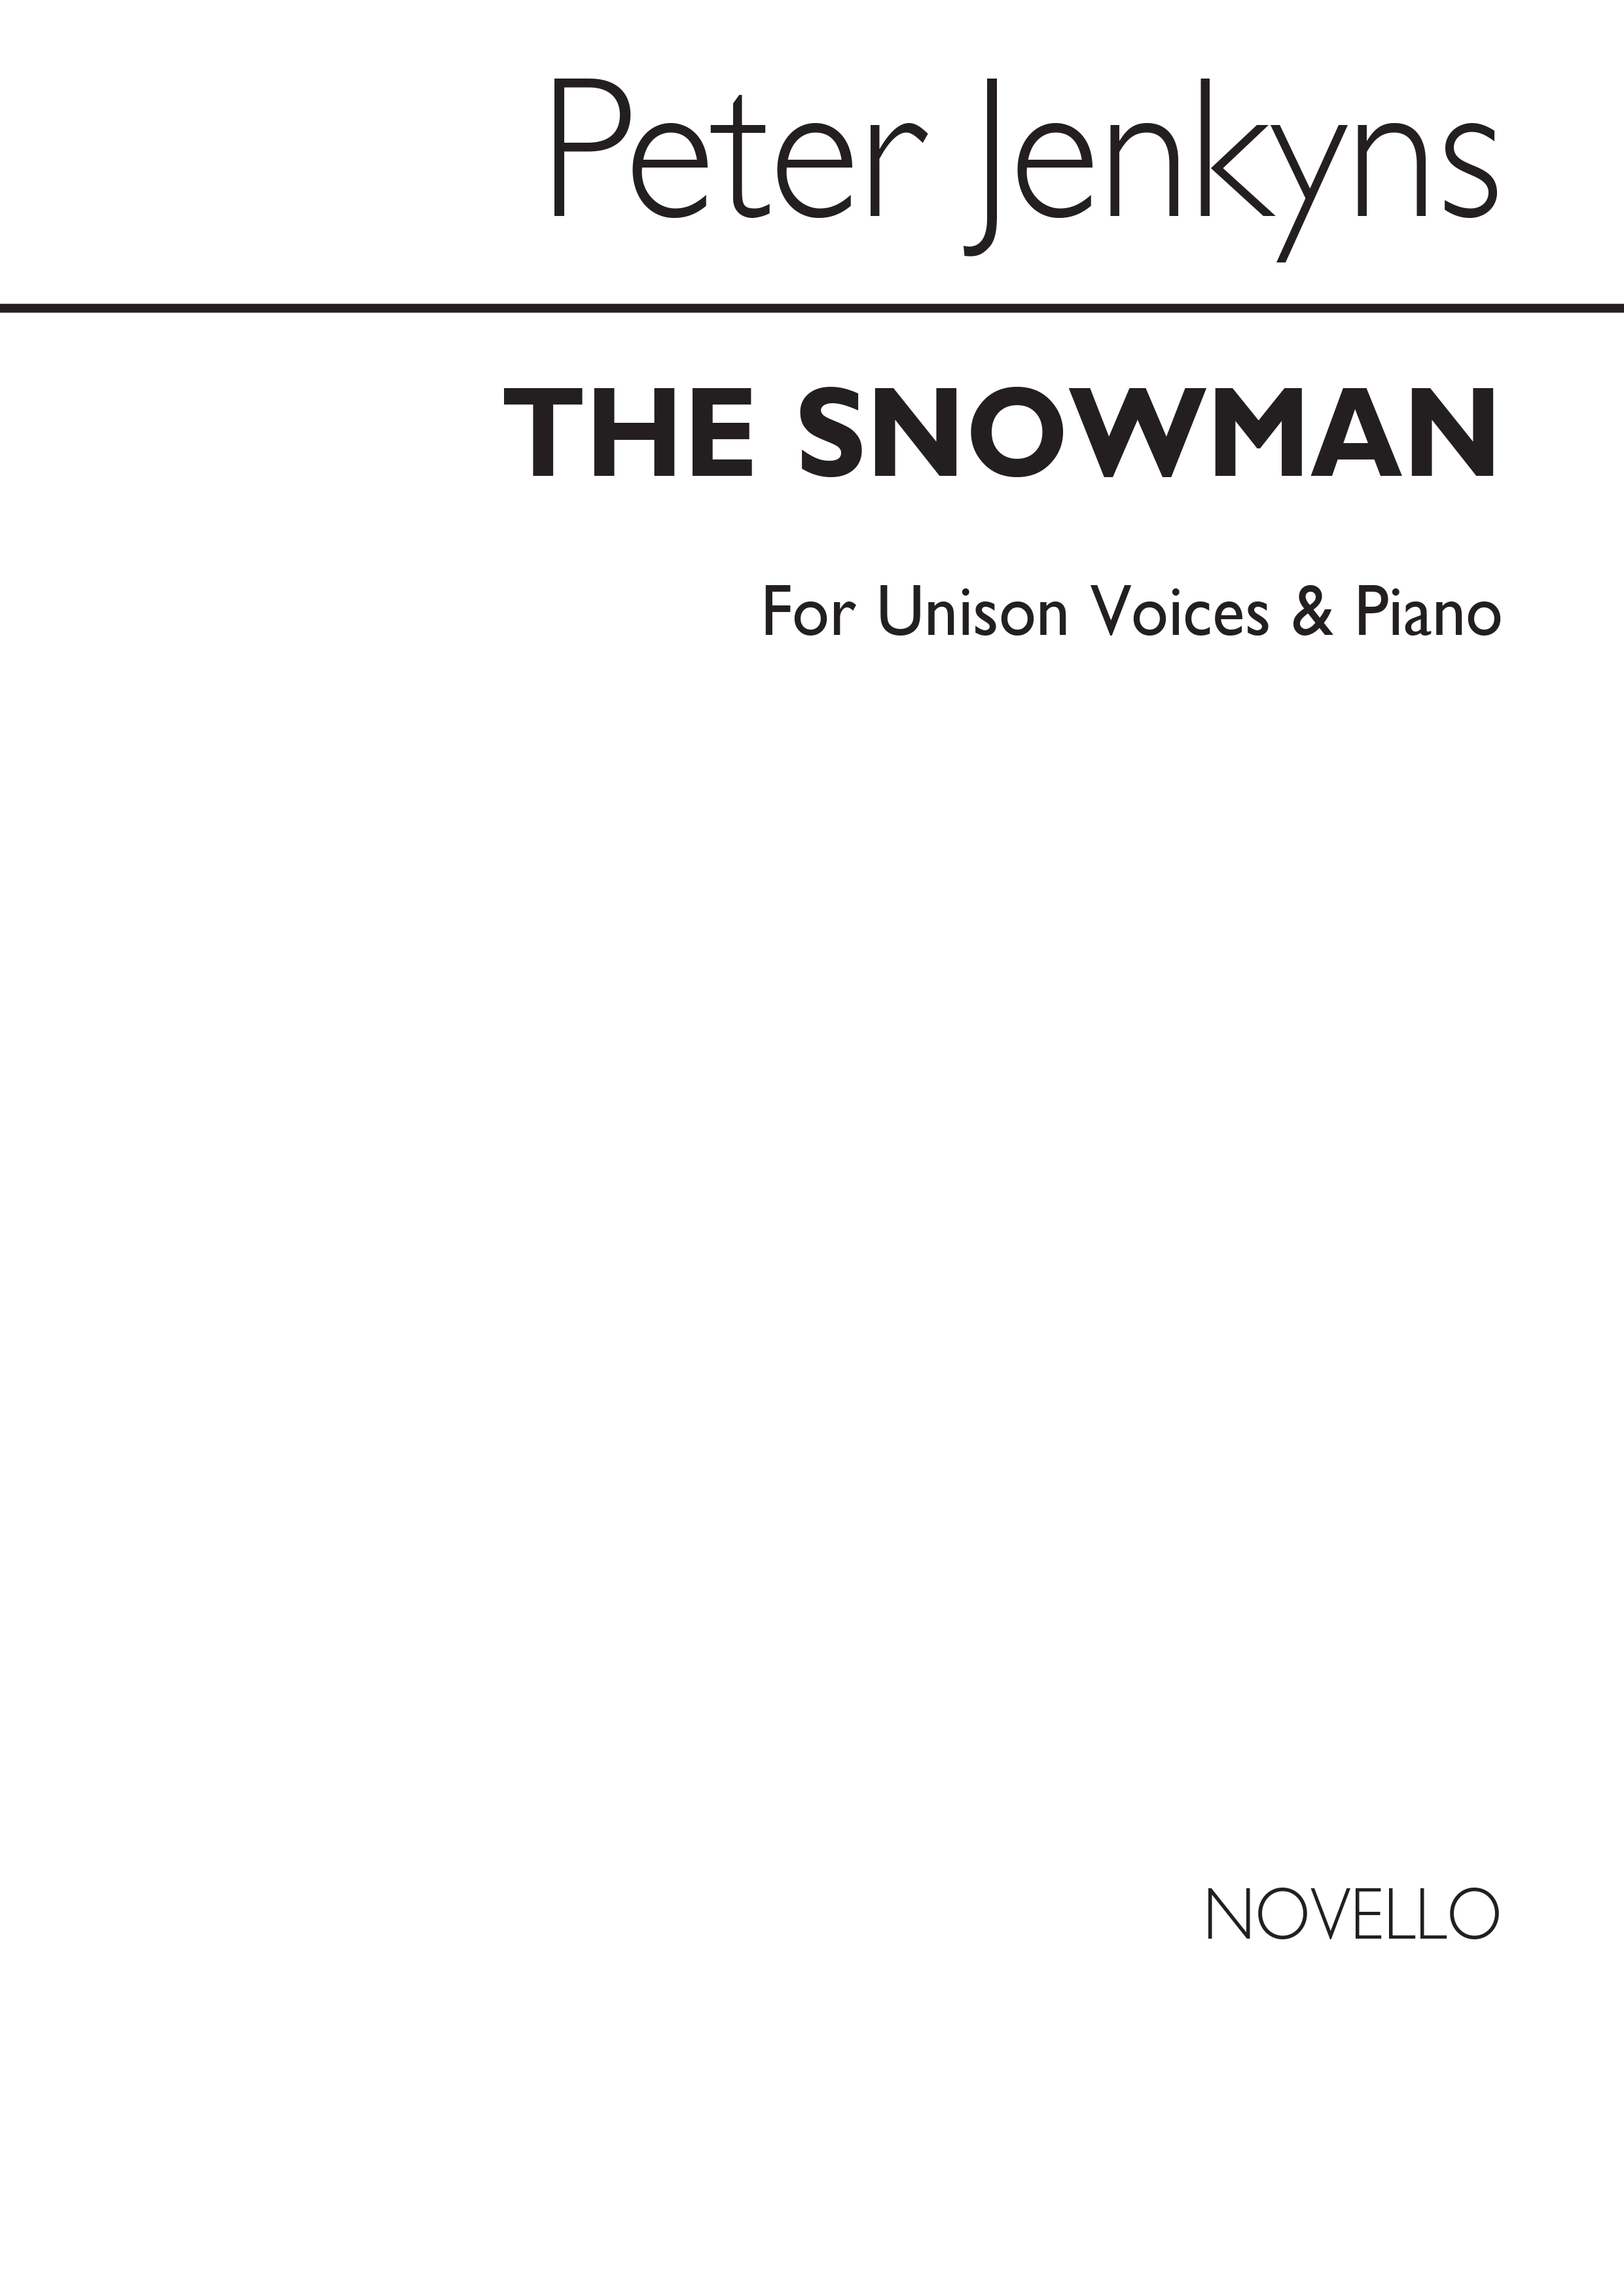 Jenkyns: The Snowman for Unison voices and Piano